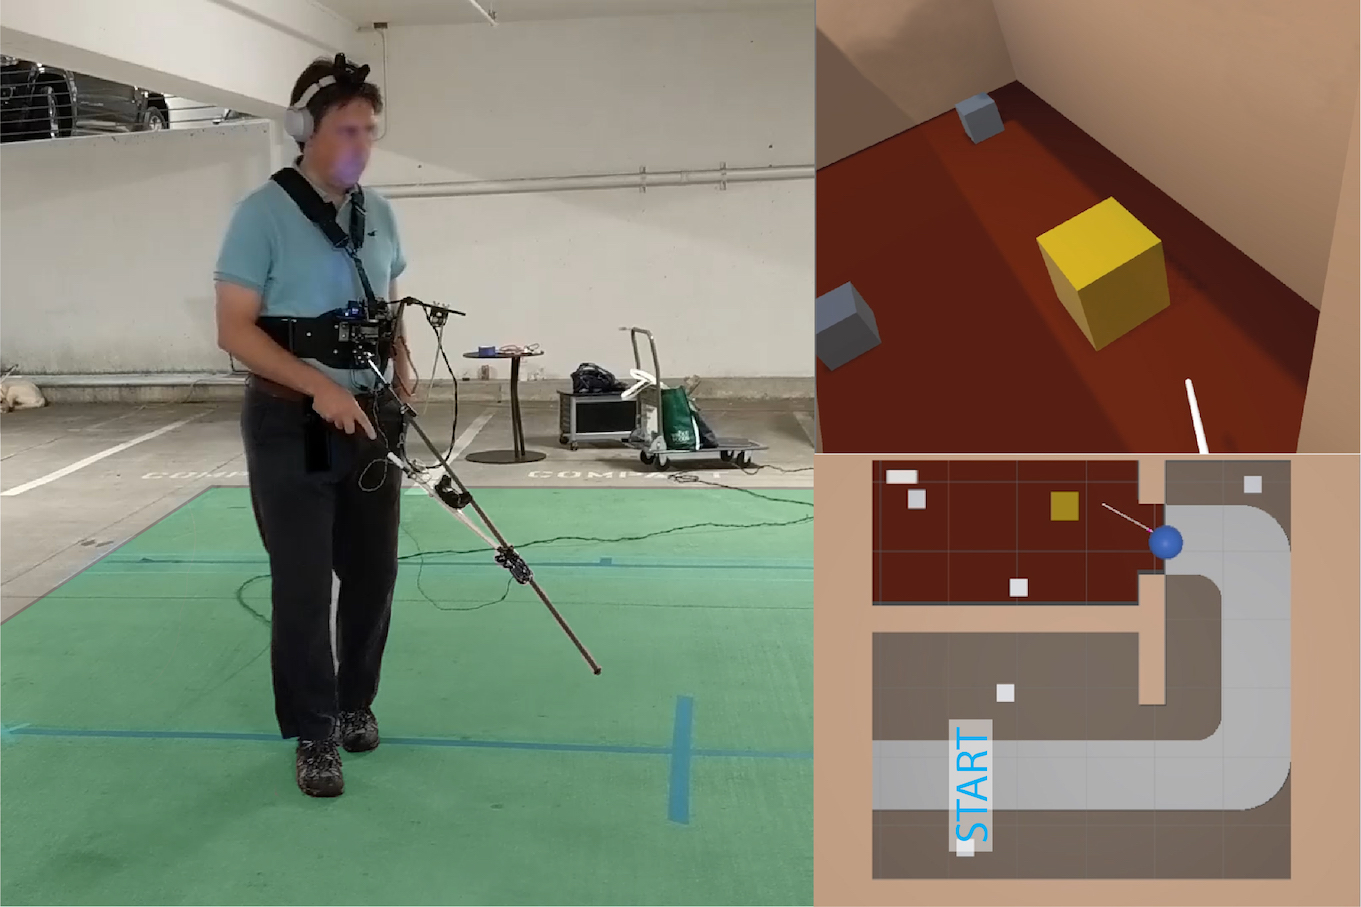 'Three images. The first shows a person wearing the  prototype of a white cane VR controller. The second shows  the first-person view that the person would see if they were  wearing a head-mounted display in VR. The last shows the  overhead view of the map of a virtual environment along  with the position of the user.'